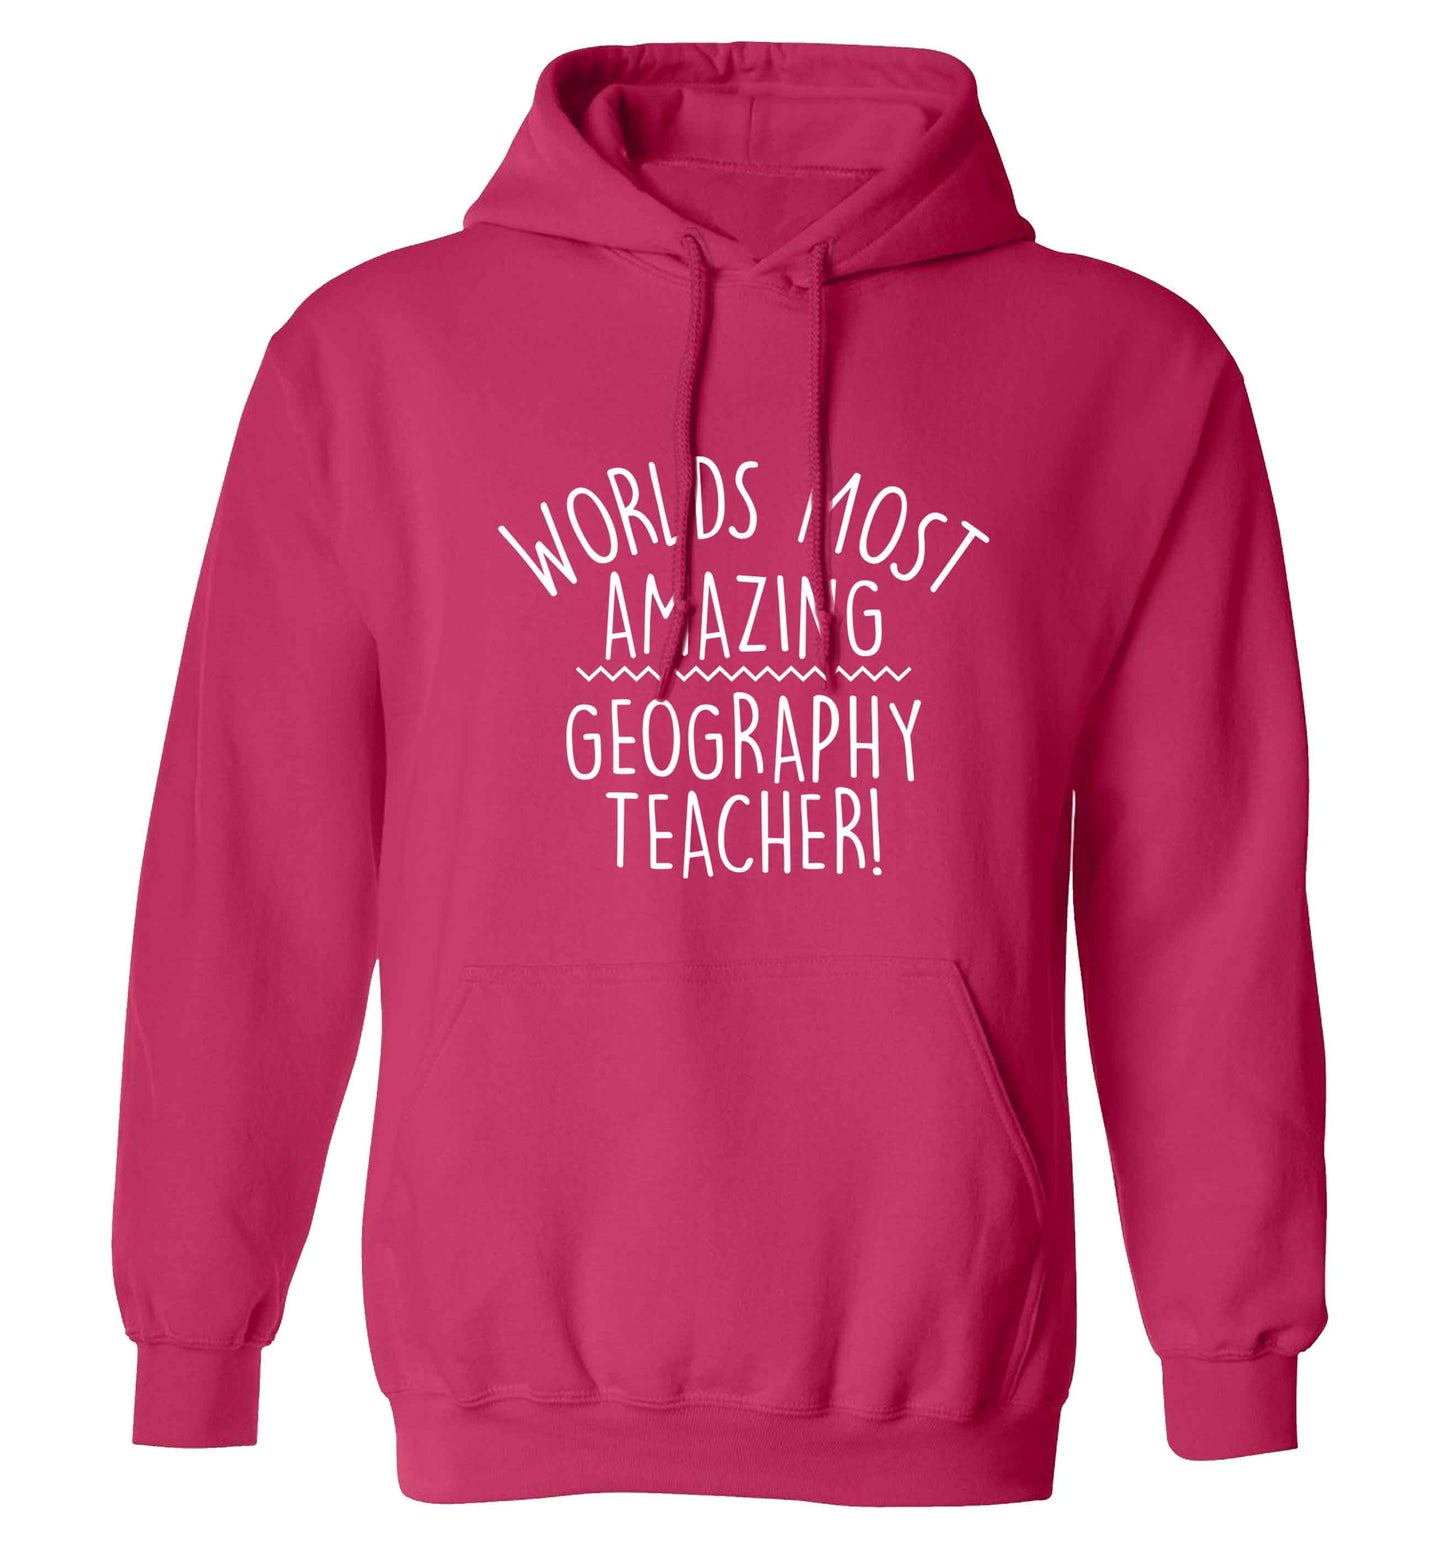 Worlds most amazing geography teacher adults unisex pink hoodie 2XL